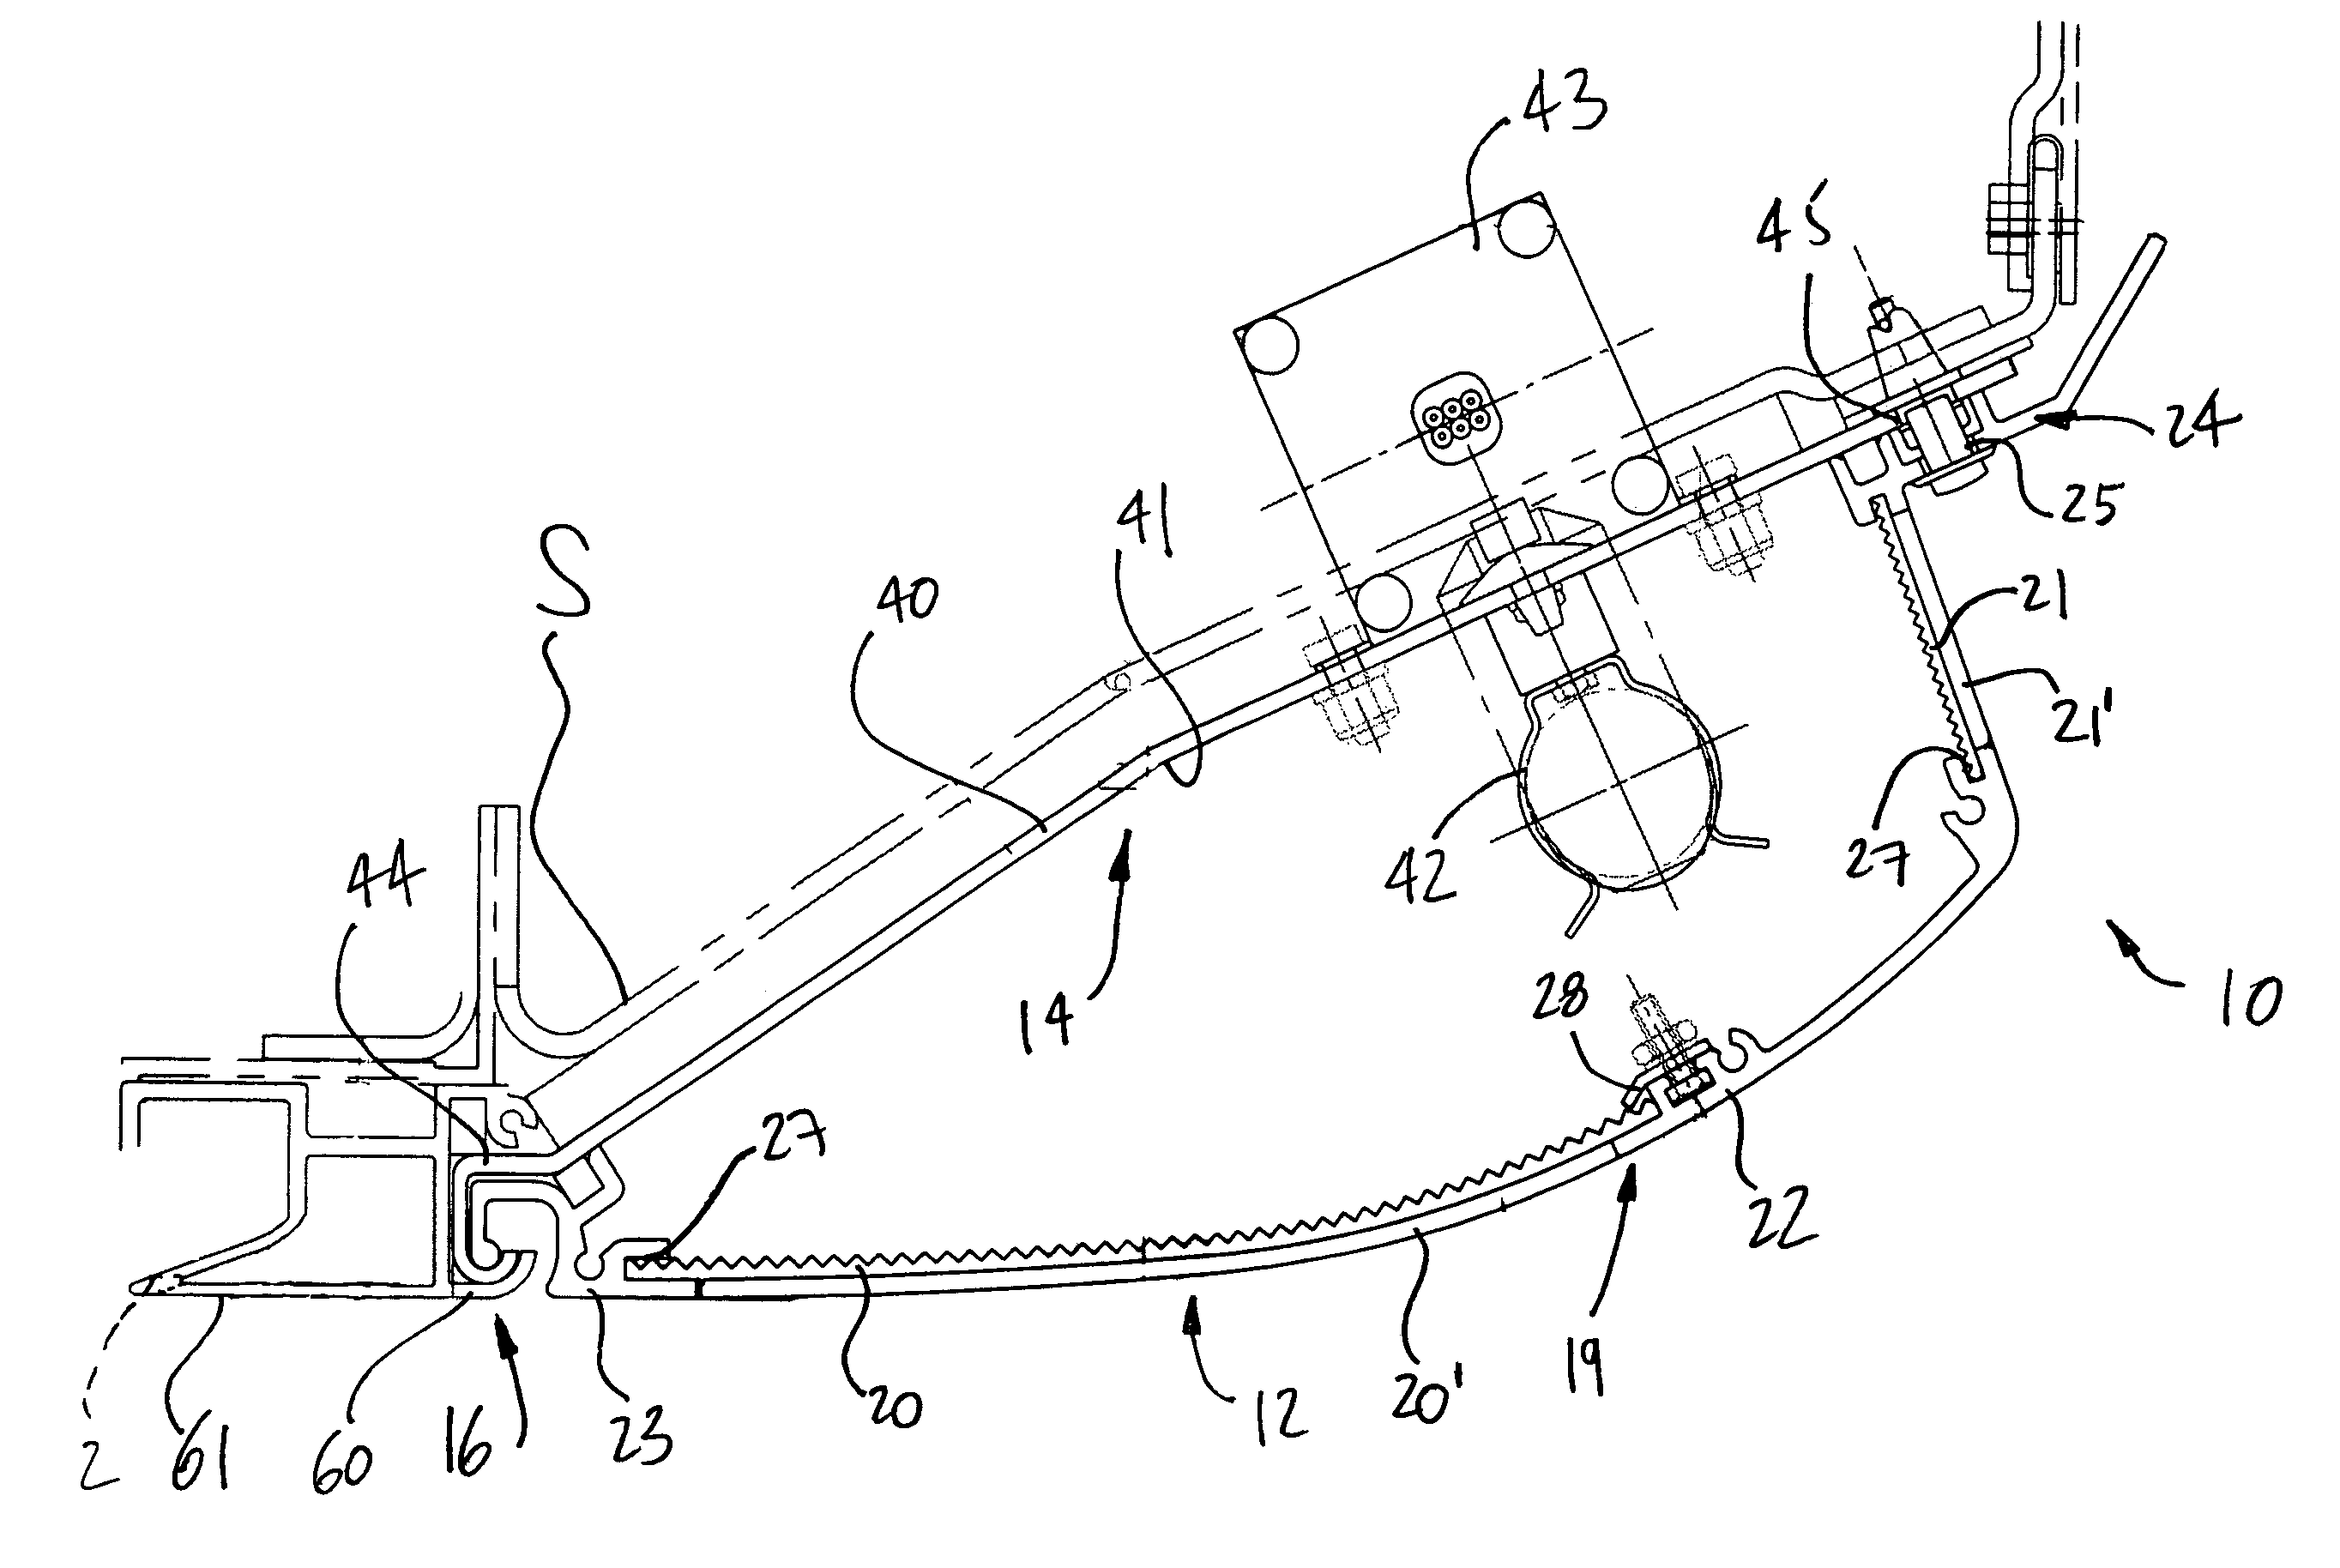 Luminaire assembly and method